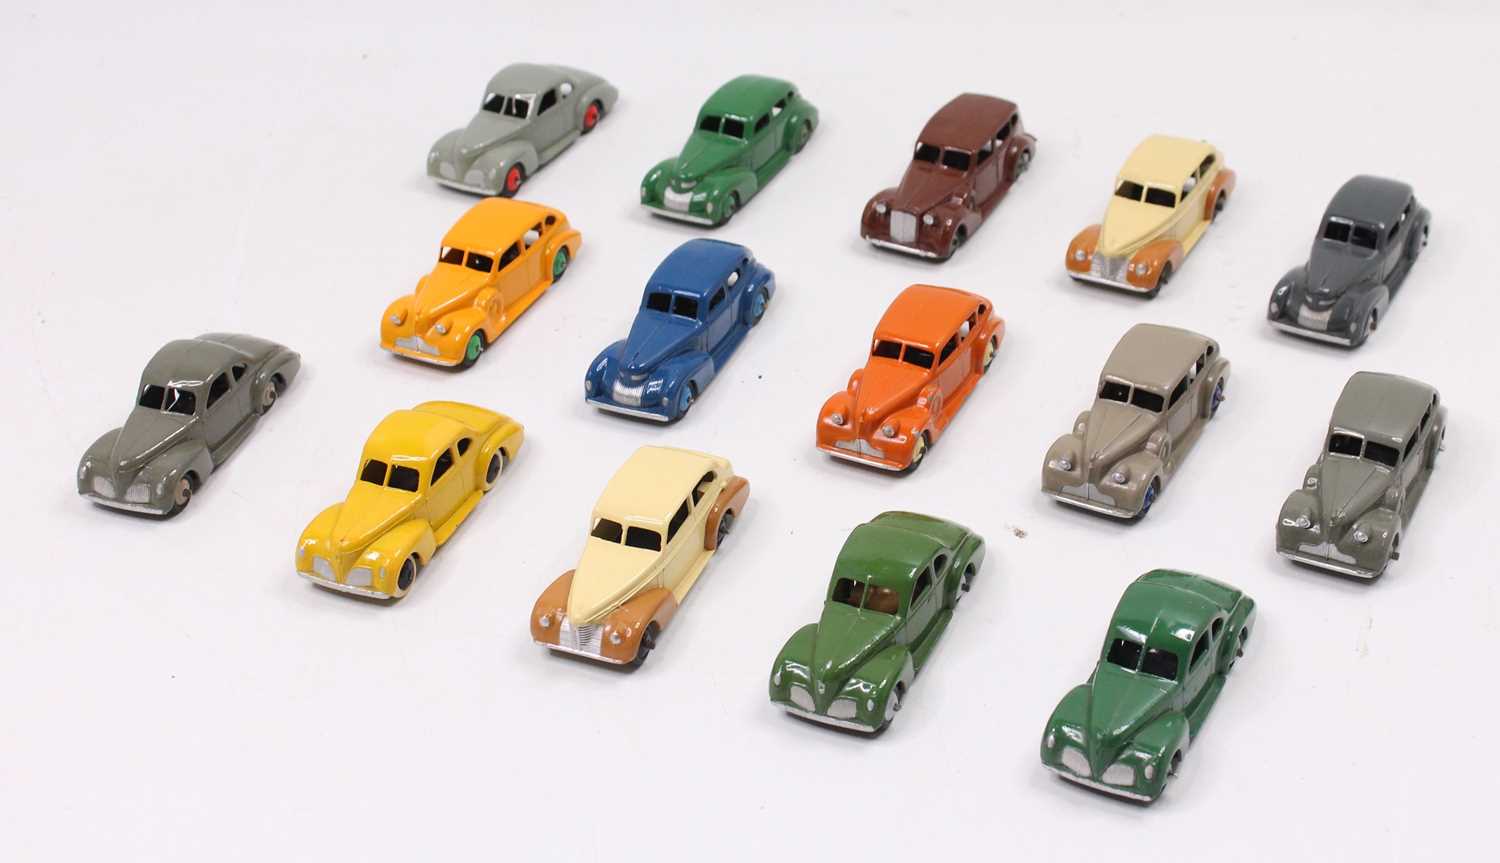 1 tray containing 15 repainted Dinky Toys to include, Buick, Chrysler and Studebaker models